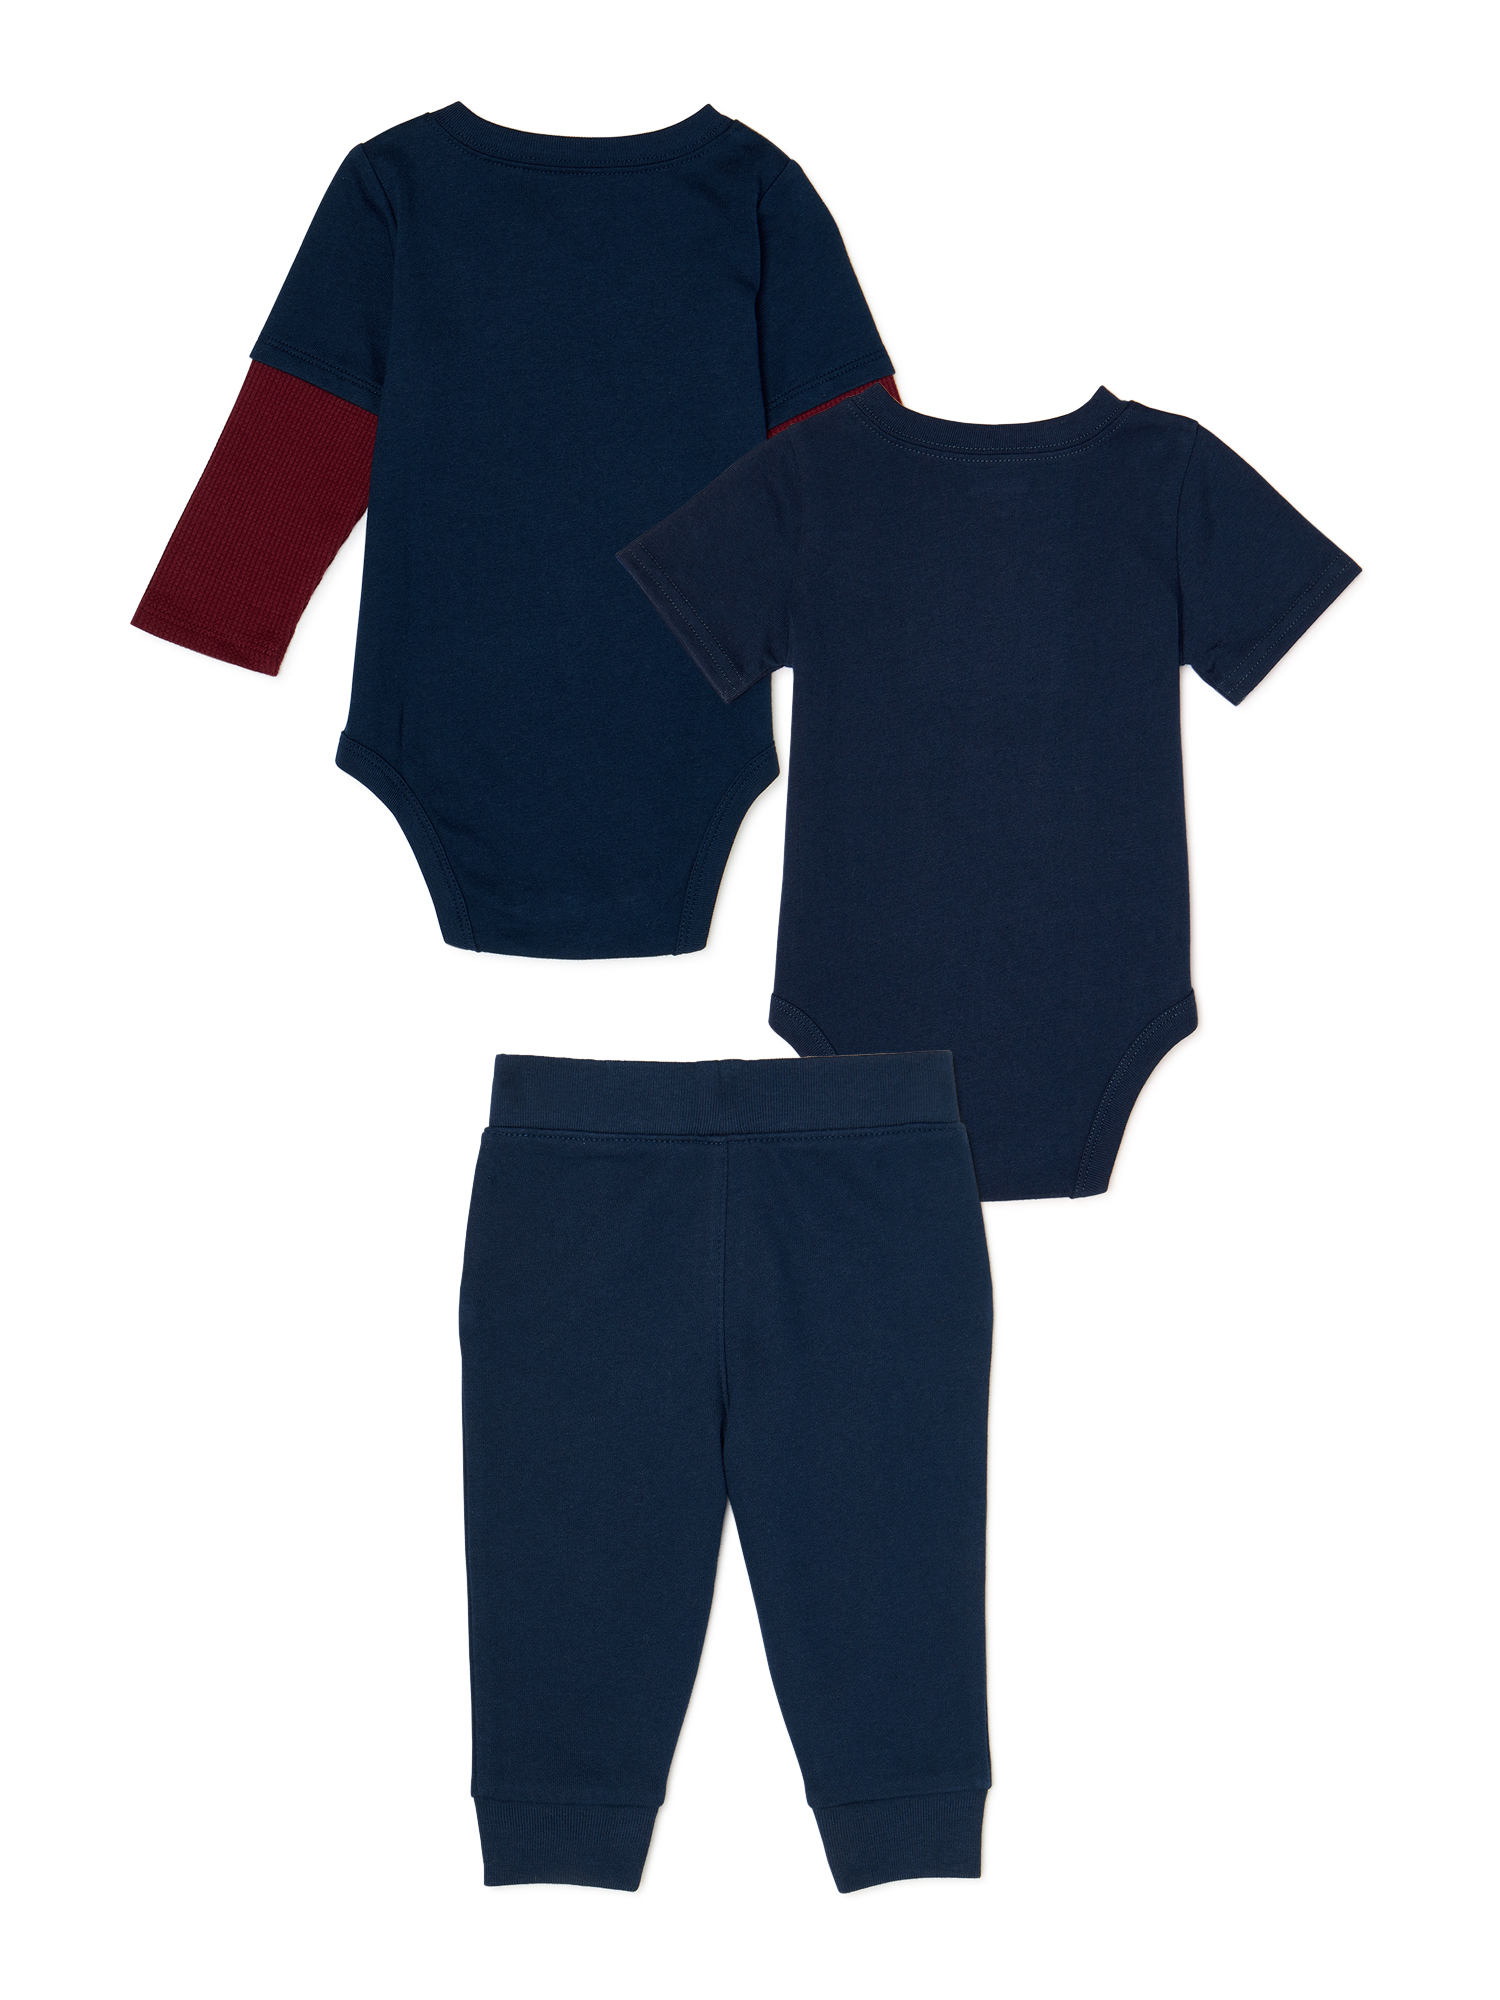 Garanimals Baby Boy Bodysuits and Joggers Outfit Set, 3-Piece - image 2 of 3